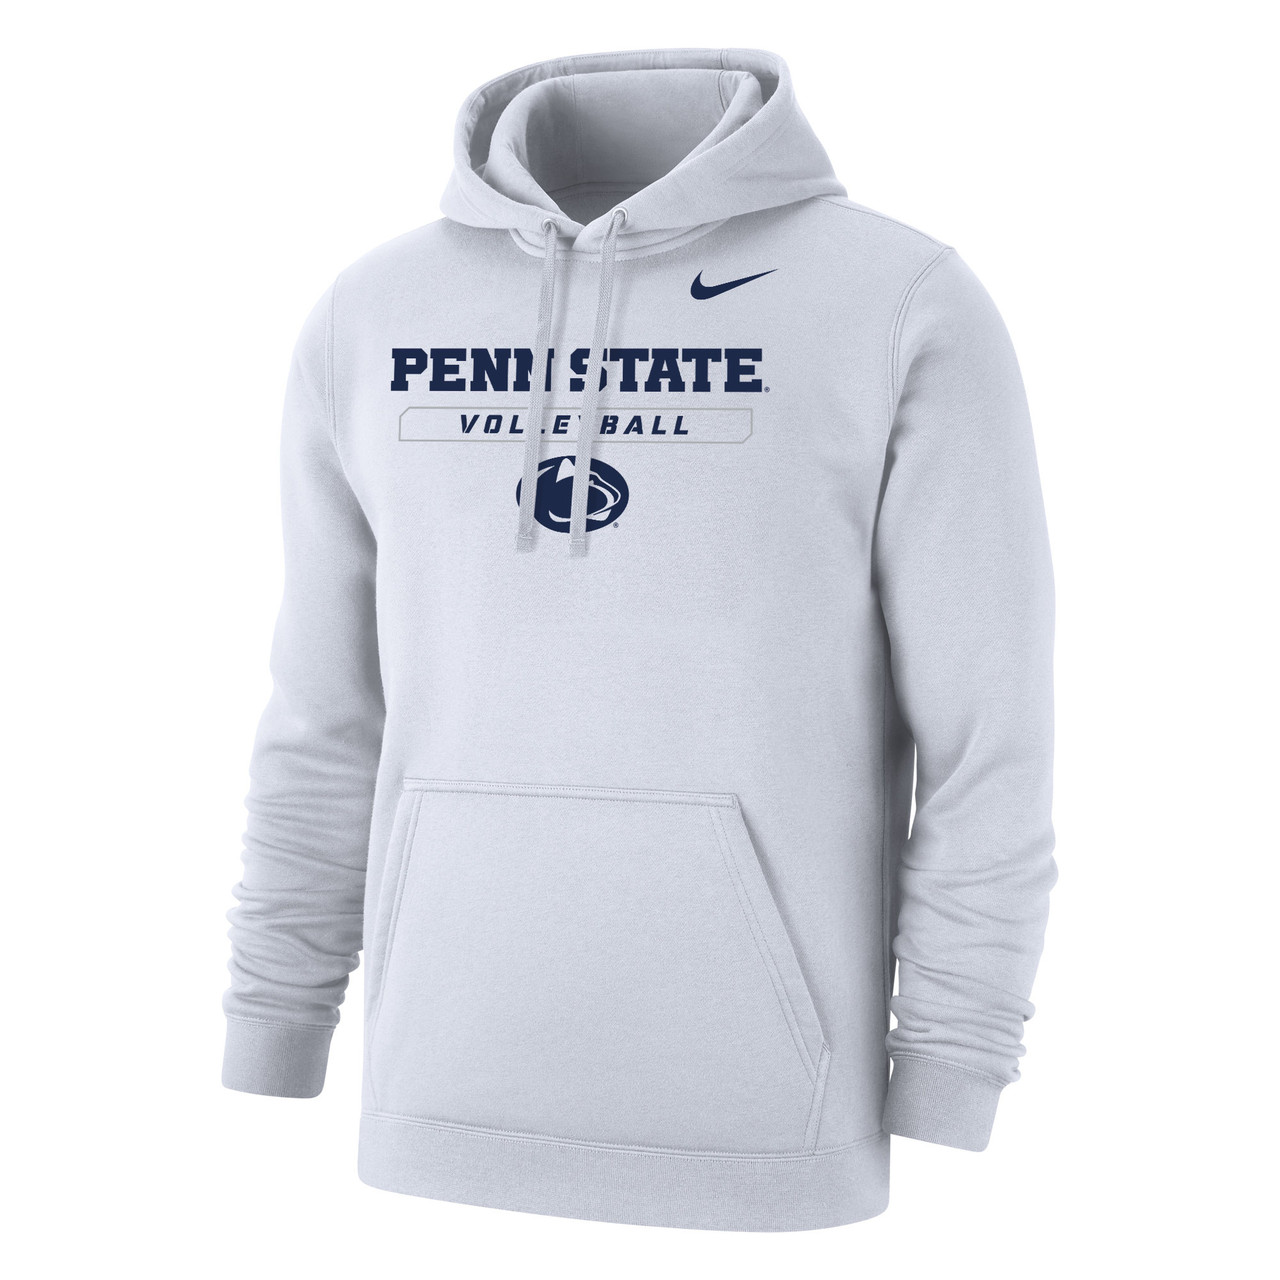 Athlete Performance Solutions Nike Men's Volleyball Penn State Dri-Fit Cotton Long Sleeve Tee - Dark Heather | Size: X-Large Unisex